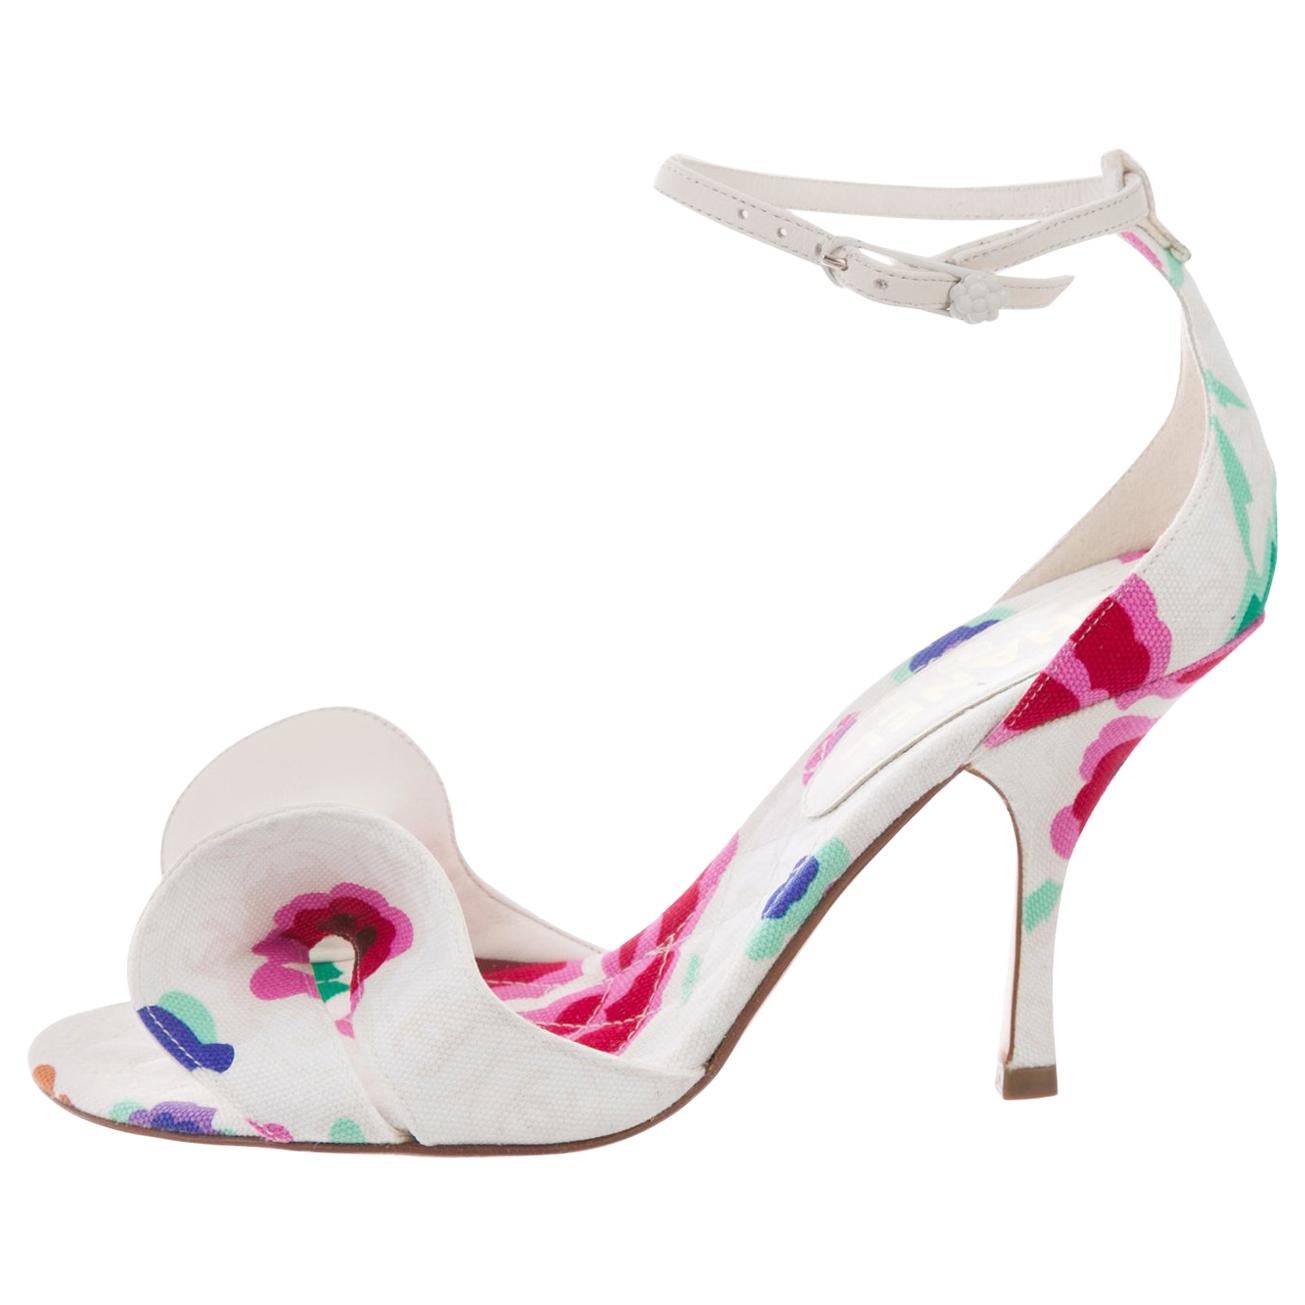 Chanel NEW White Floral Canvas Bow Evening Sandals Heels in Box